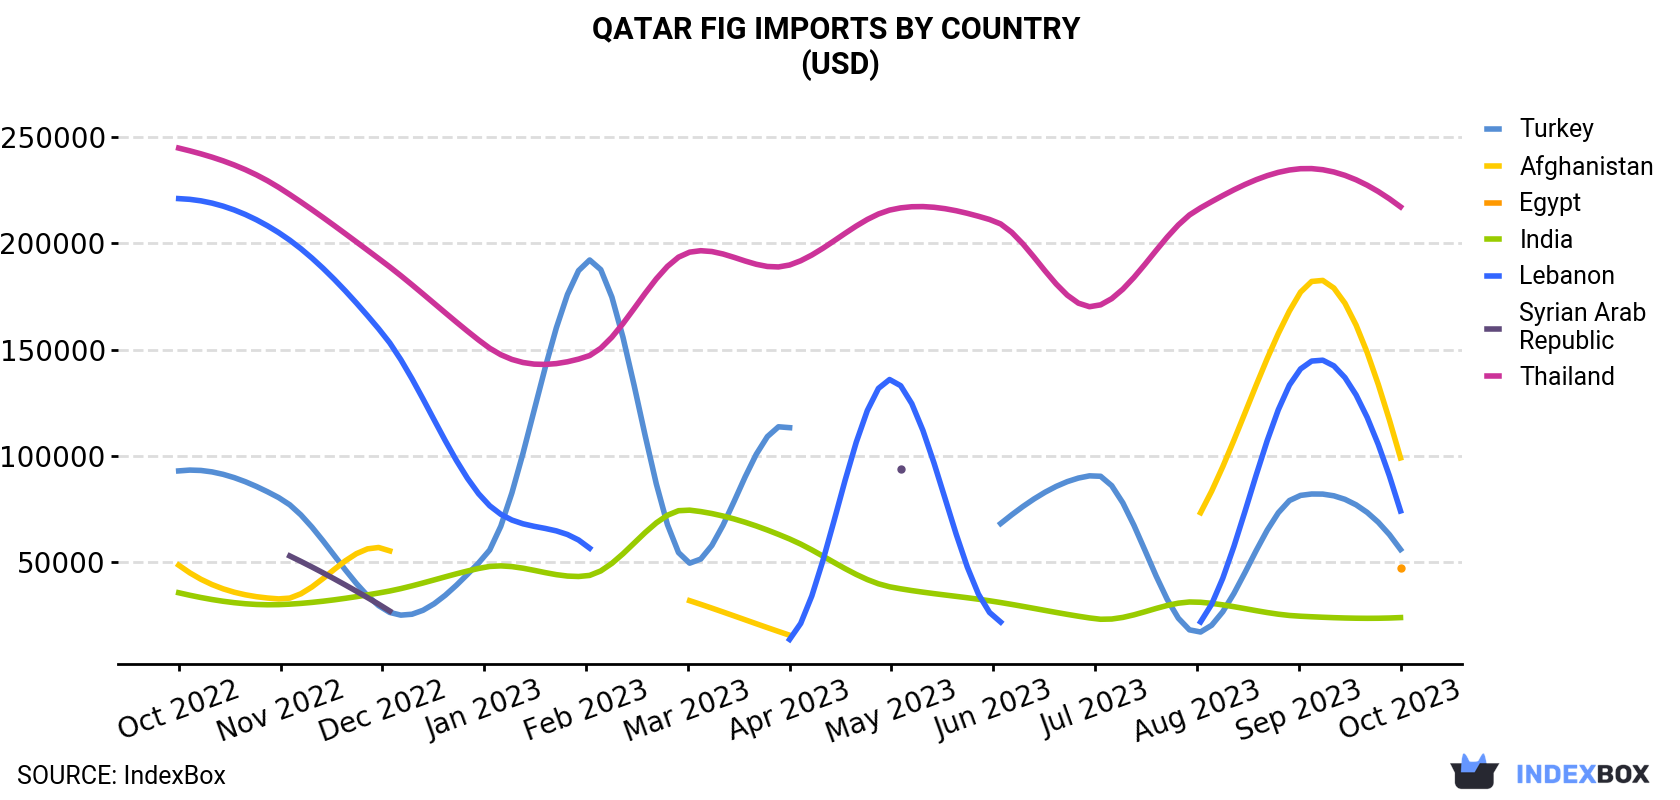 Qatar Fig Imports By Country (USD)